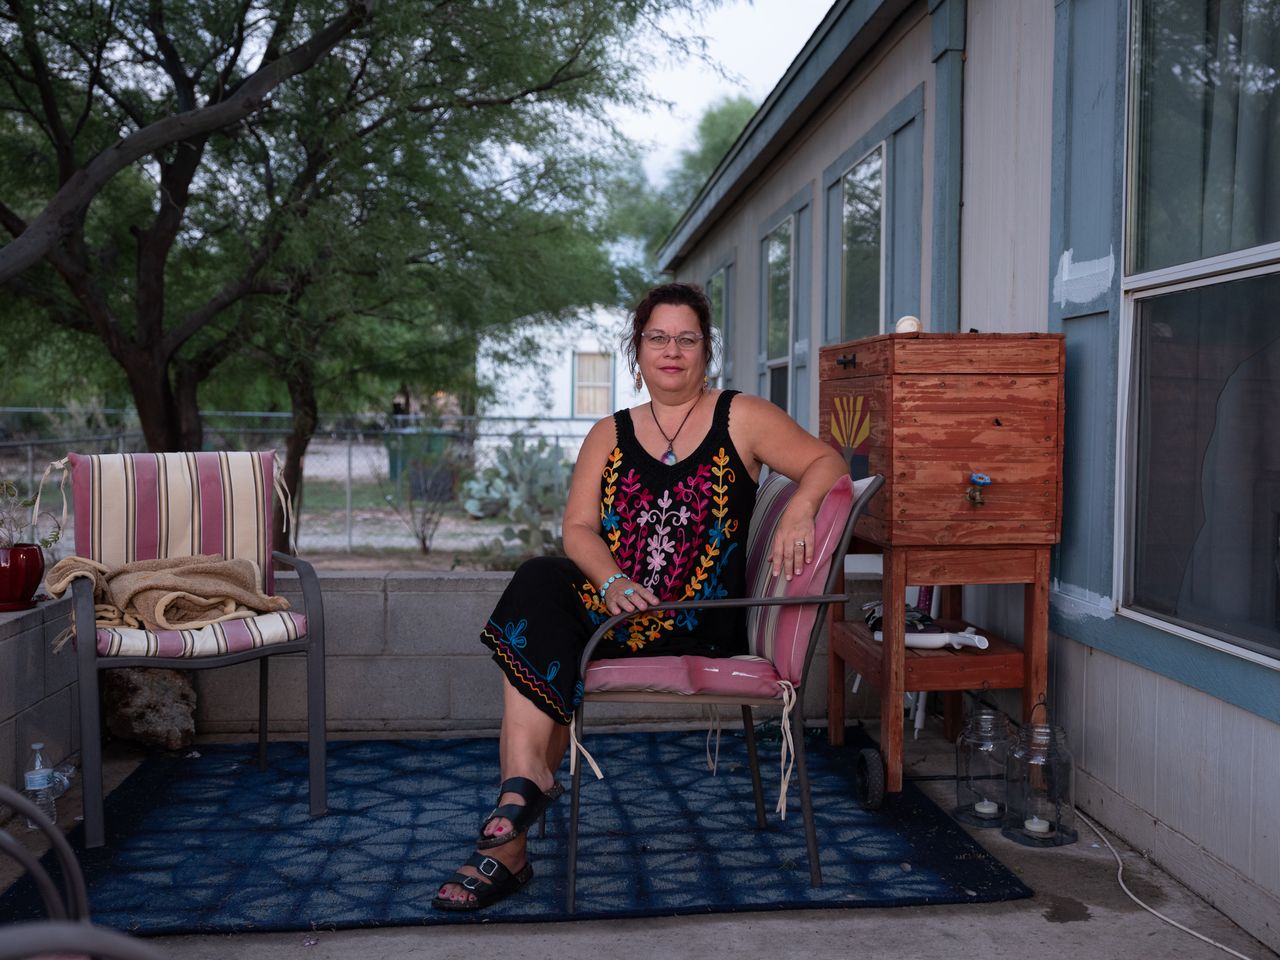 Lisa Kindle and her husband moved into their new home in Tucson from Minnesota in September 2022, after he got a new job in the city